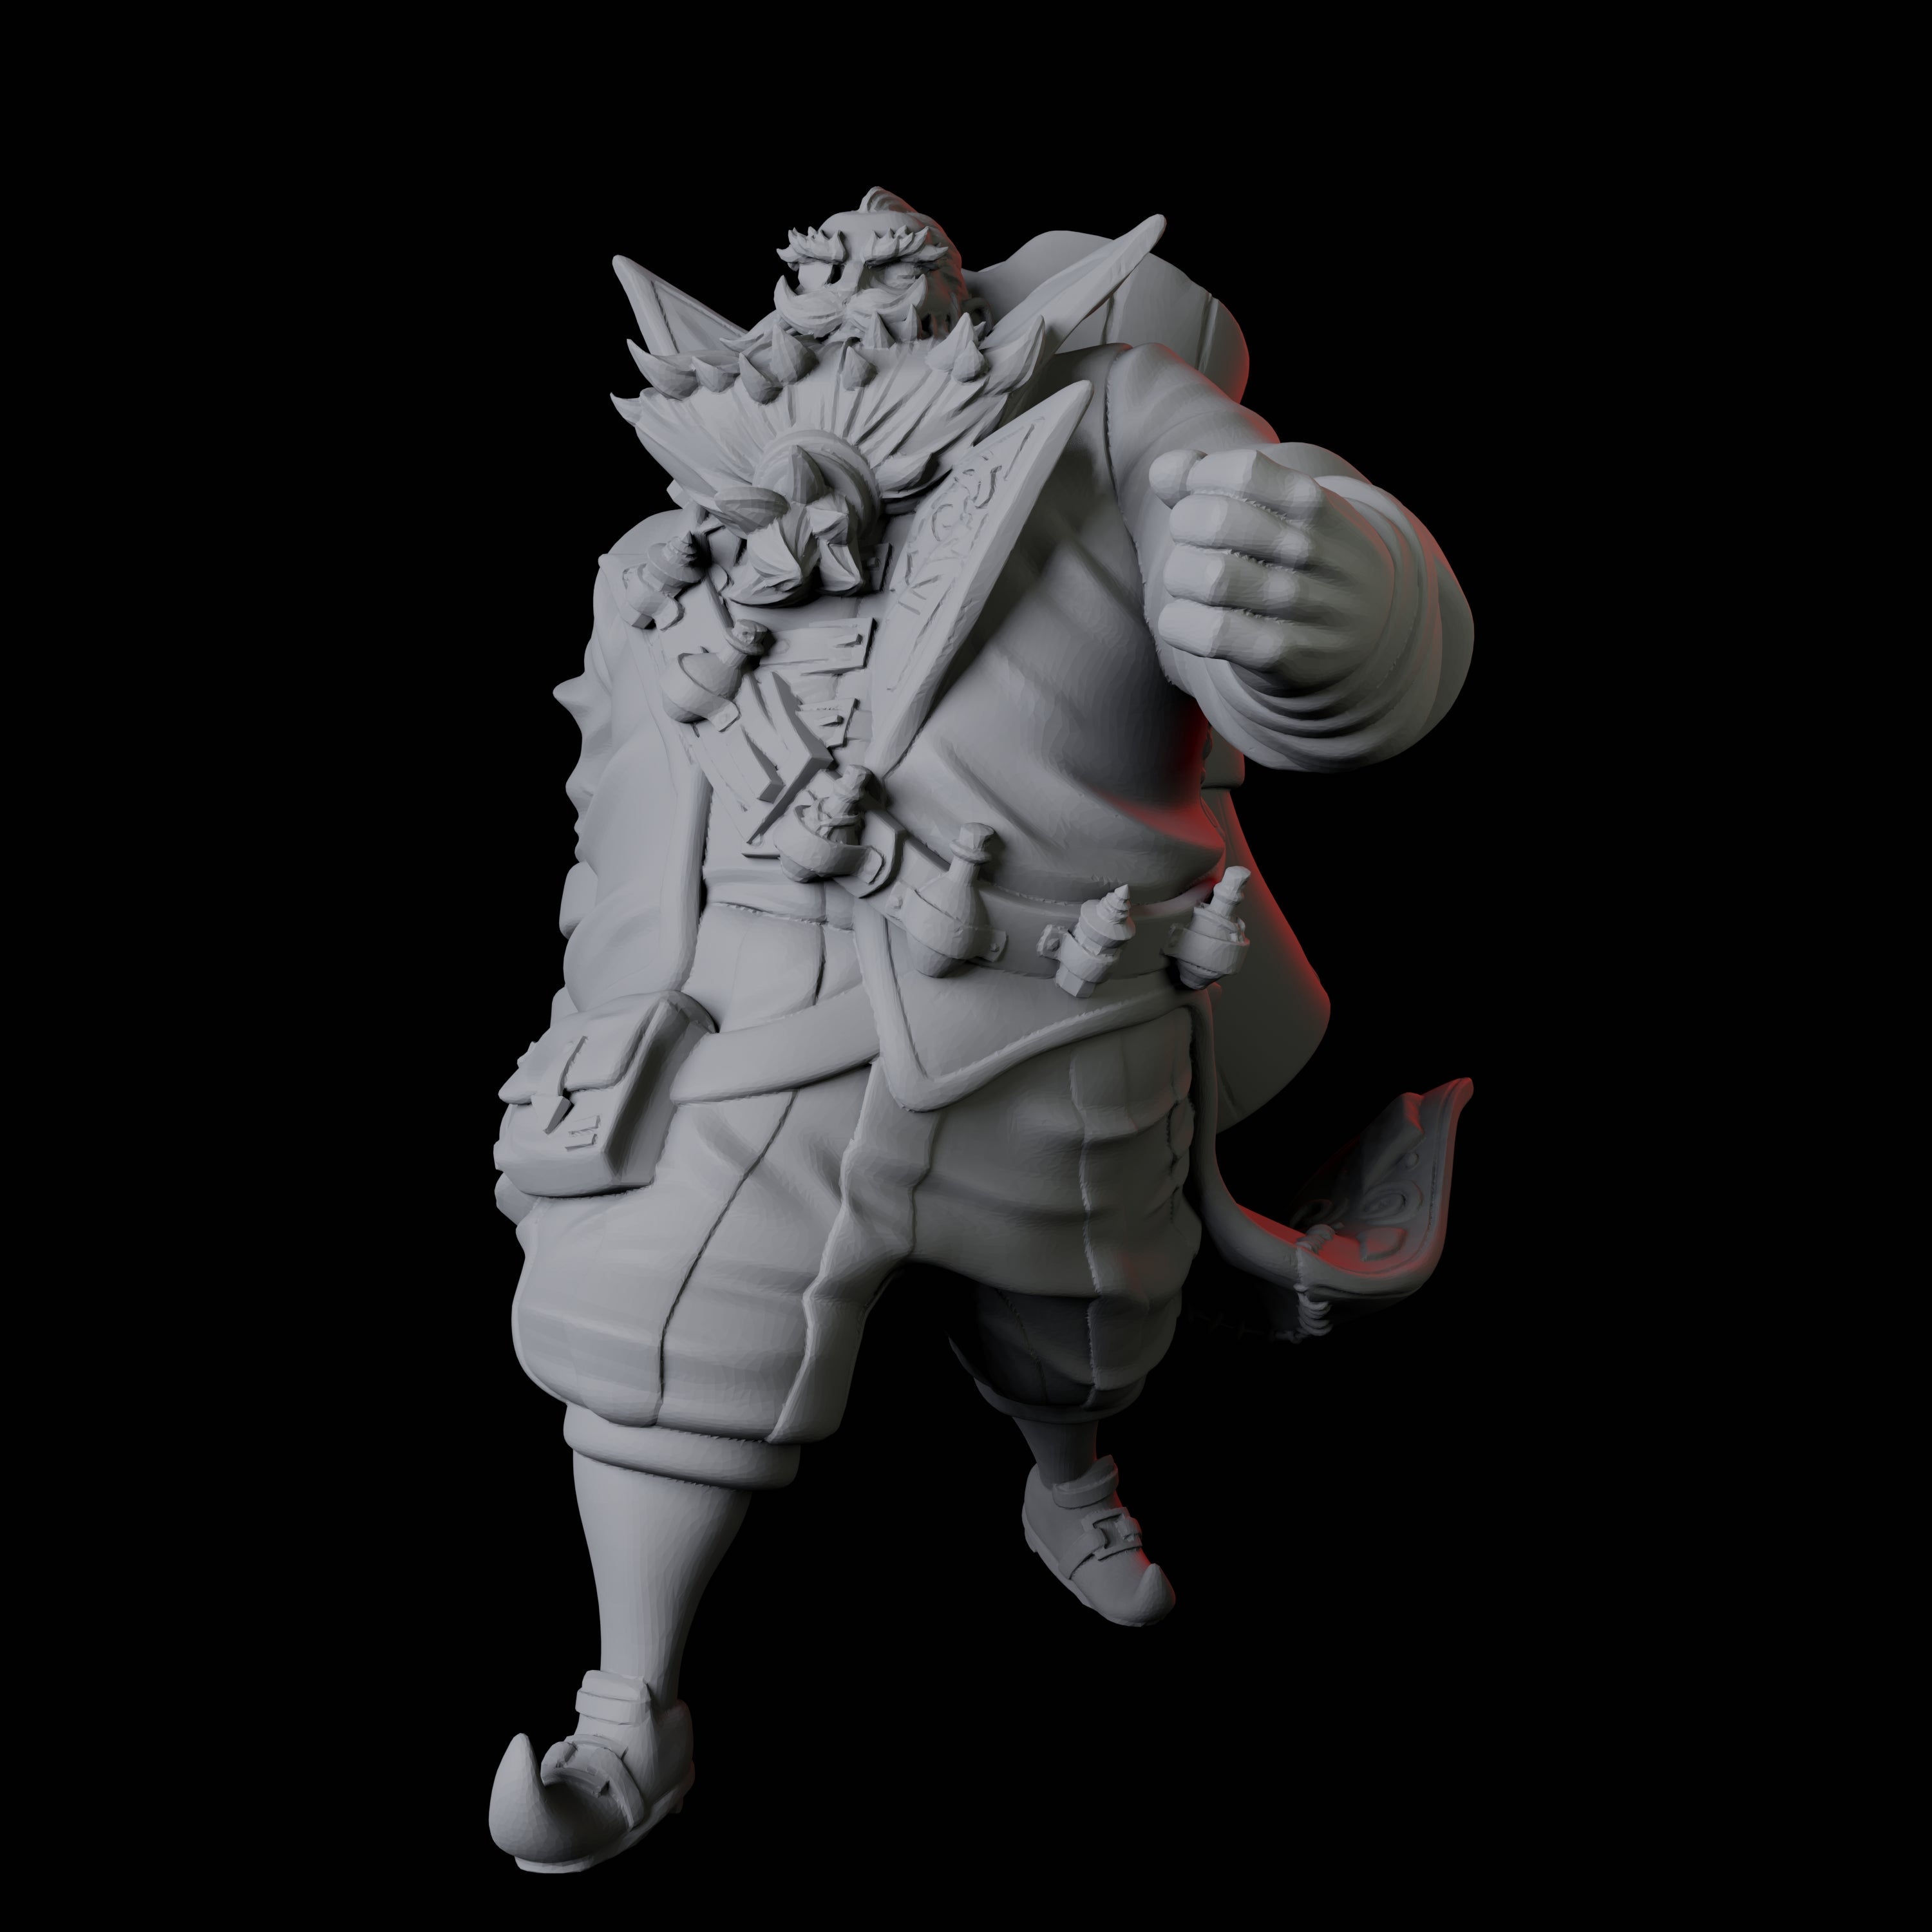 Portly Alchemist C Miniature for Dungeons and Dragons, Pathfinder or other TTRPGs